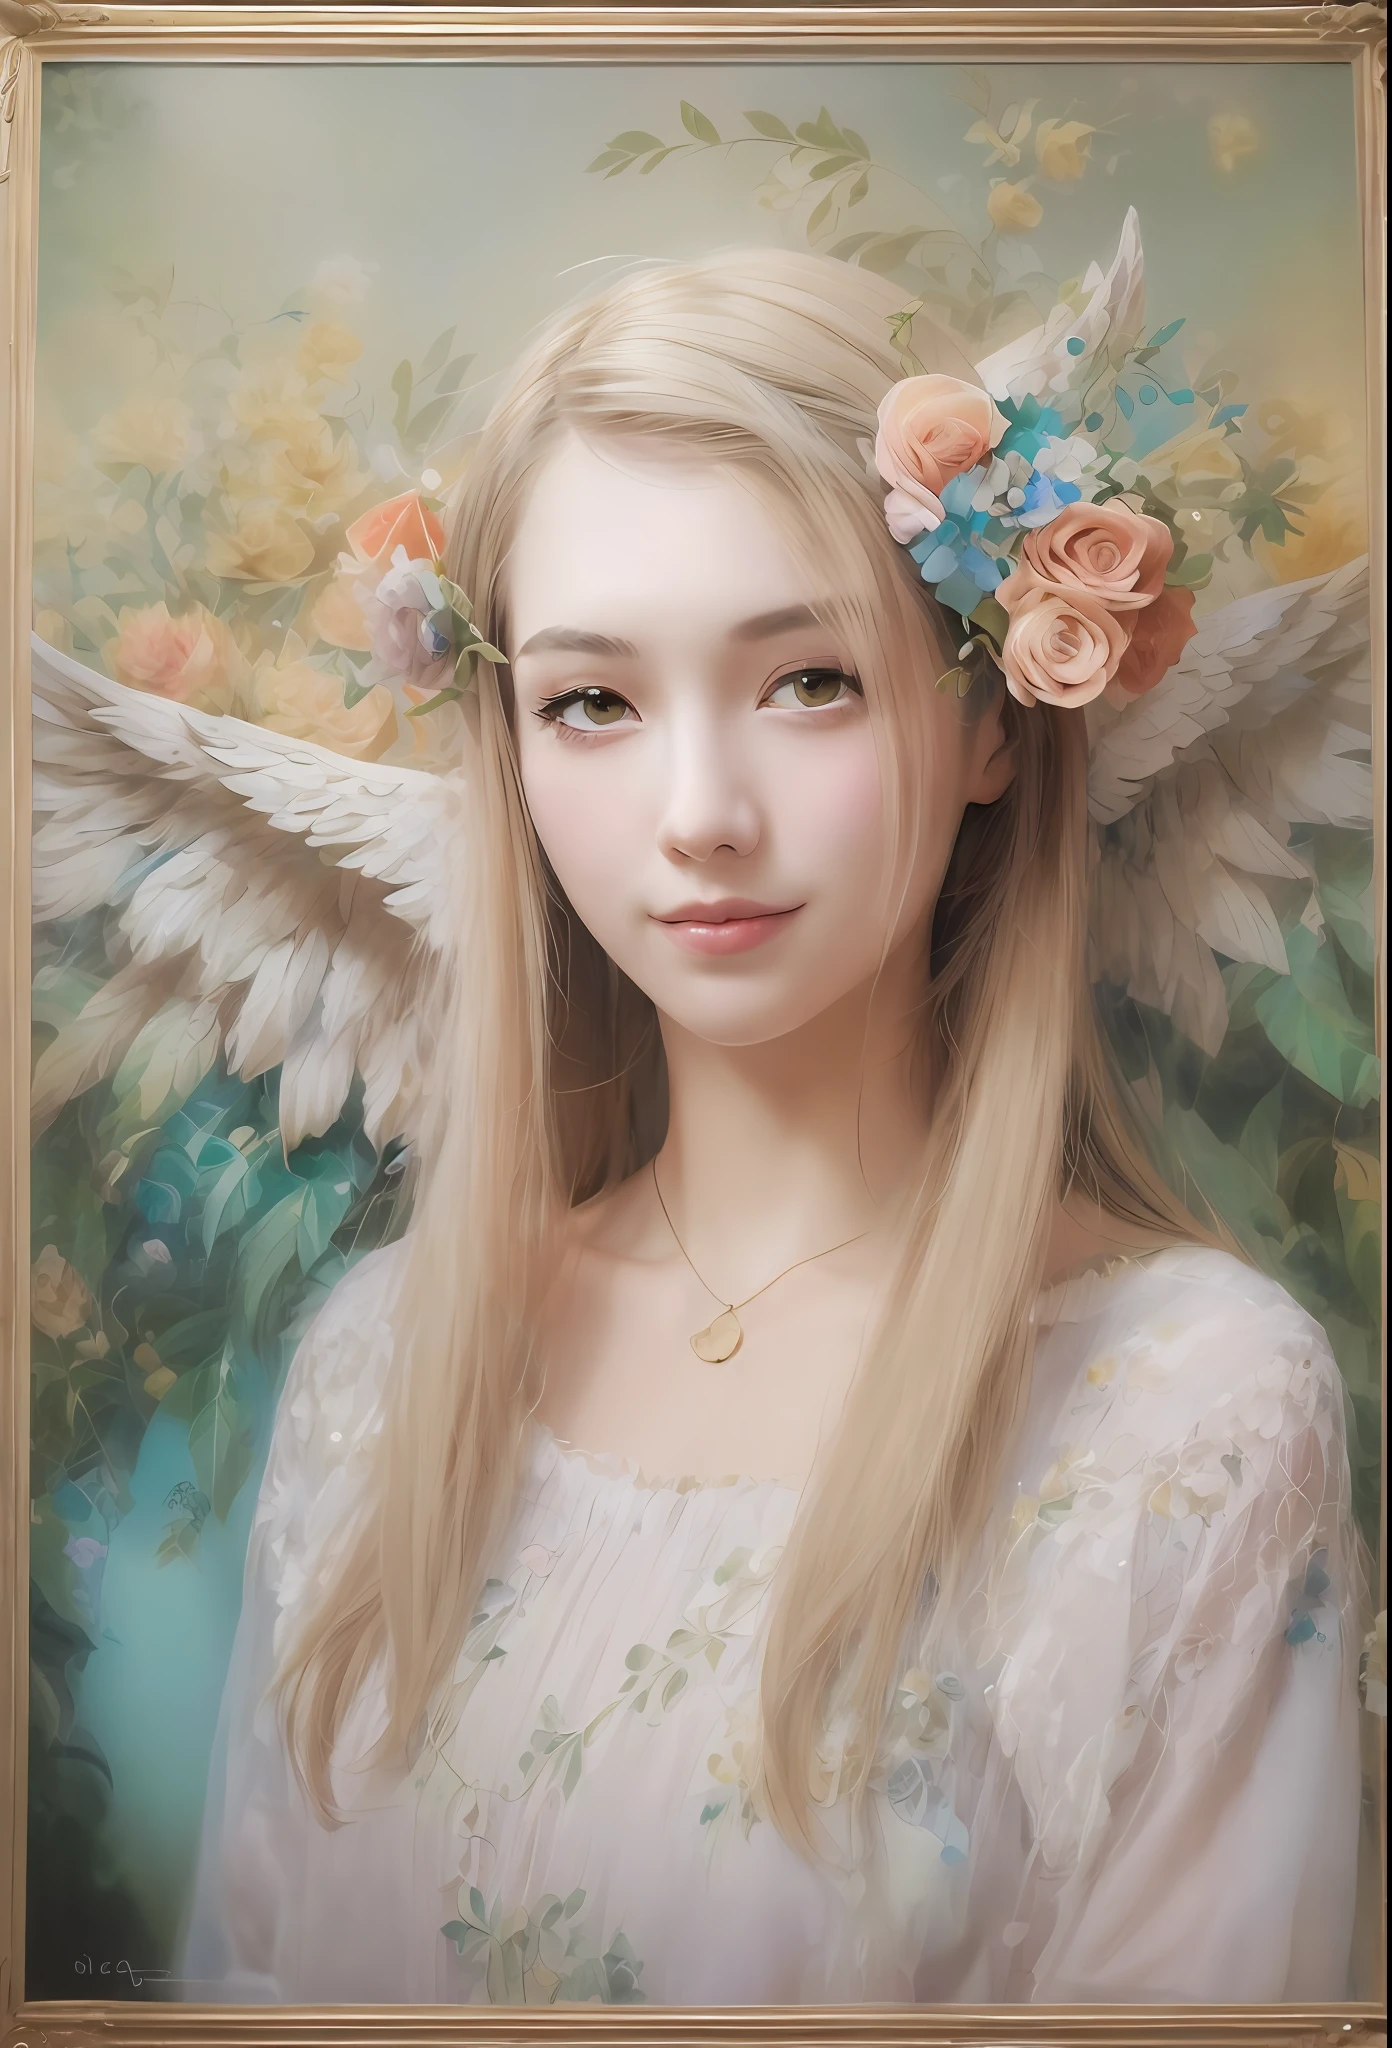 (Angel wings、😇、a smile、😌🥰Archaic Smile).hyper realstic、Ultra-realistic、Depiction of the human body without distortion、Monna Lisa、Woman in the Arms、Near and far law、Three-dimensional、Contemporary painting、moderno、world masterpiece、collection、Homage to the art or artist work of Picasso and Renoir, Not sentimental、Excellent portrayal、Gentle expression、More detailed character faces, Serious competition、Compositions like paintings、(Konmutsuki_Gacha_Series 1, punk_rosette), Realistic、Delicate brushwork、aqua color flowers, (Full body, elegant flowers background)